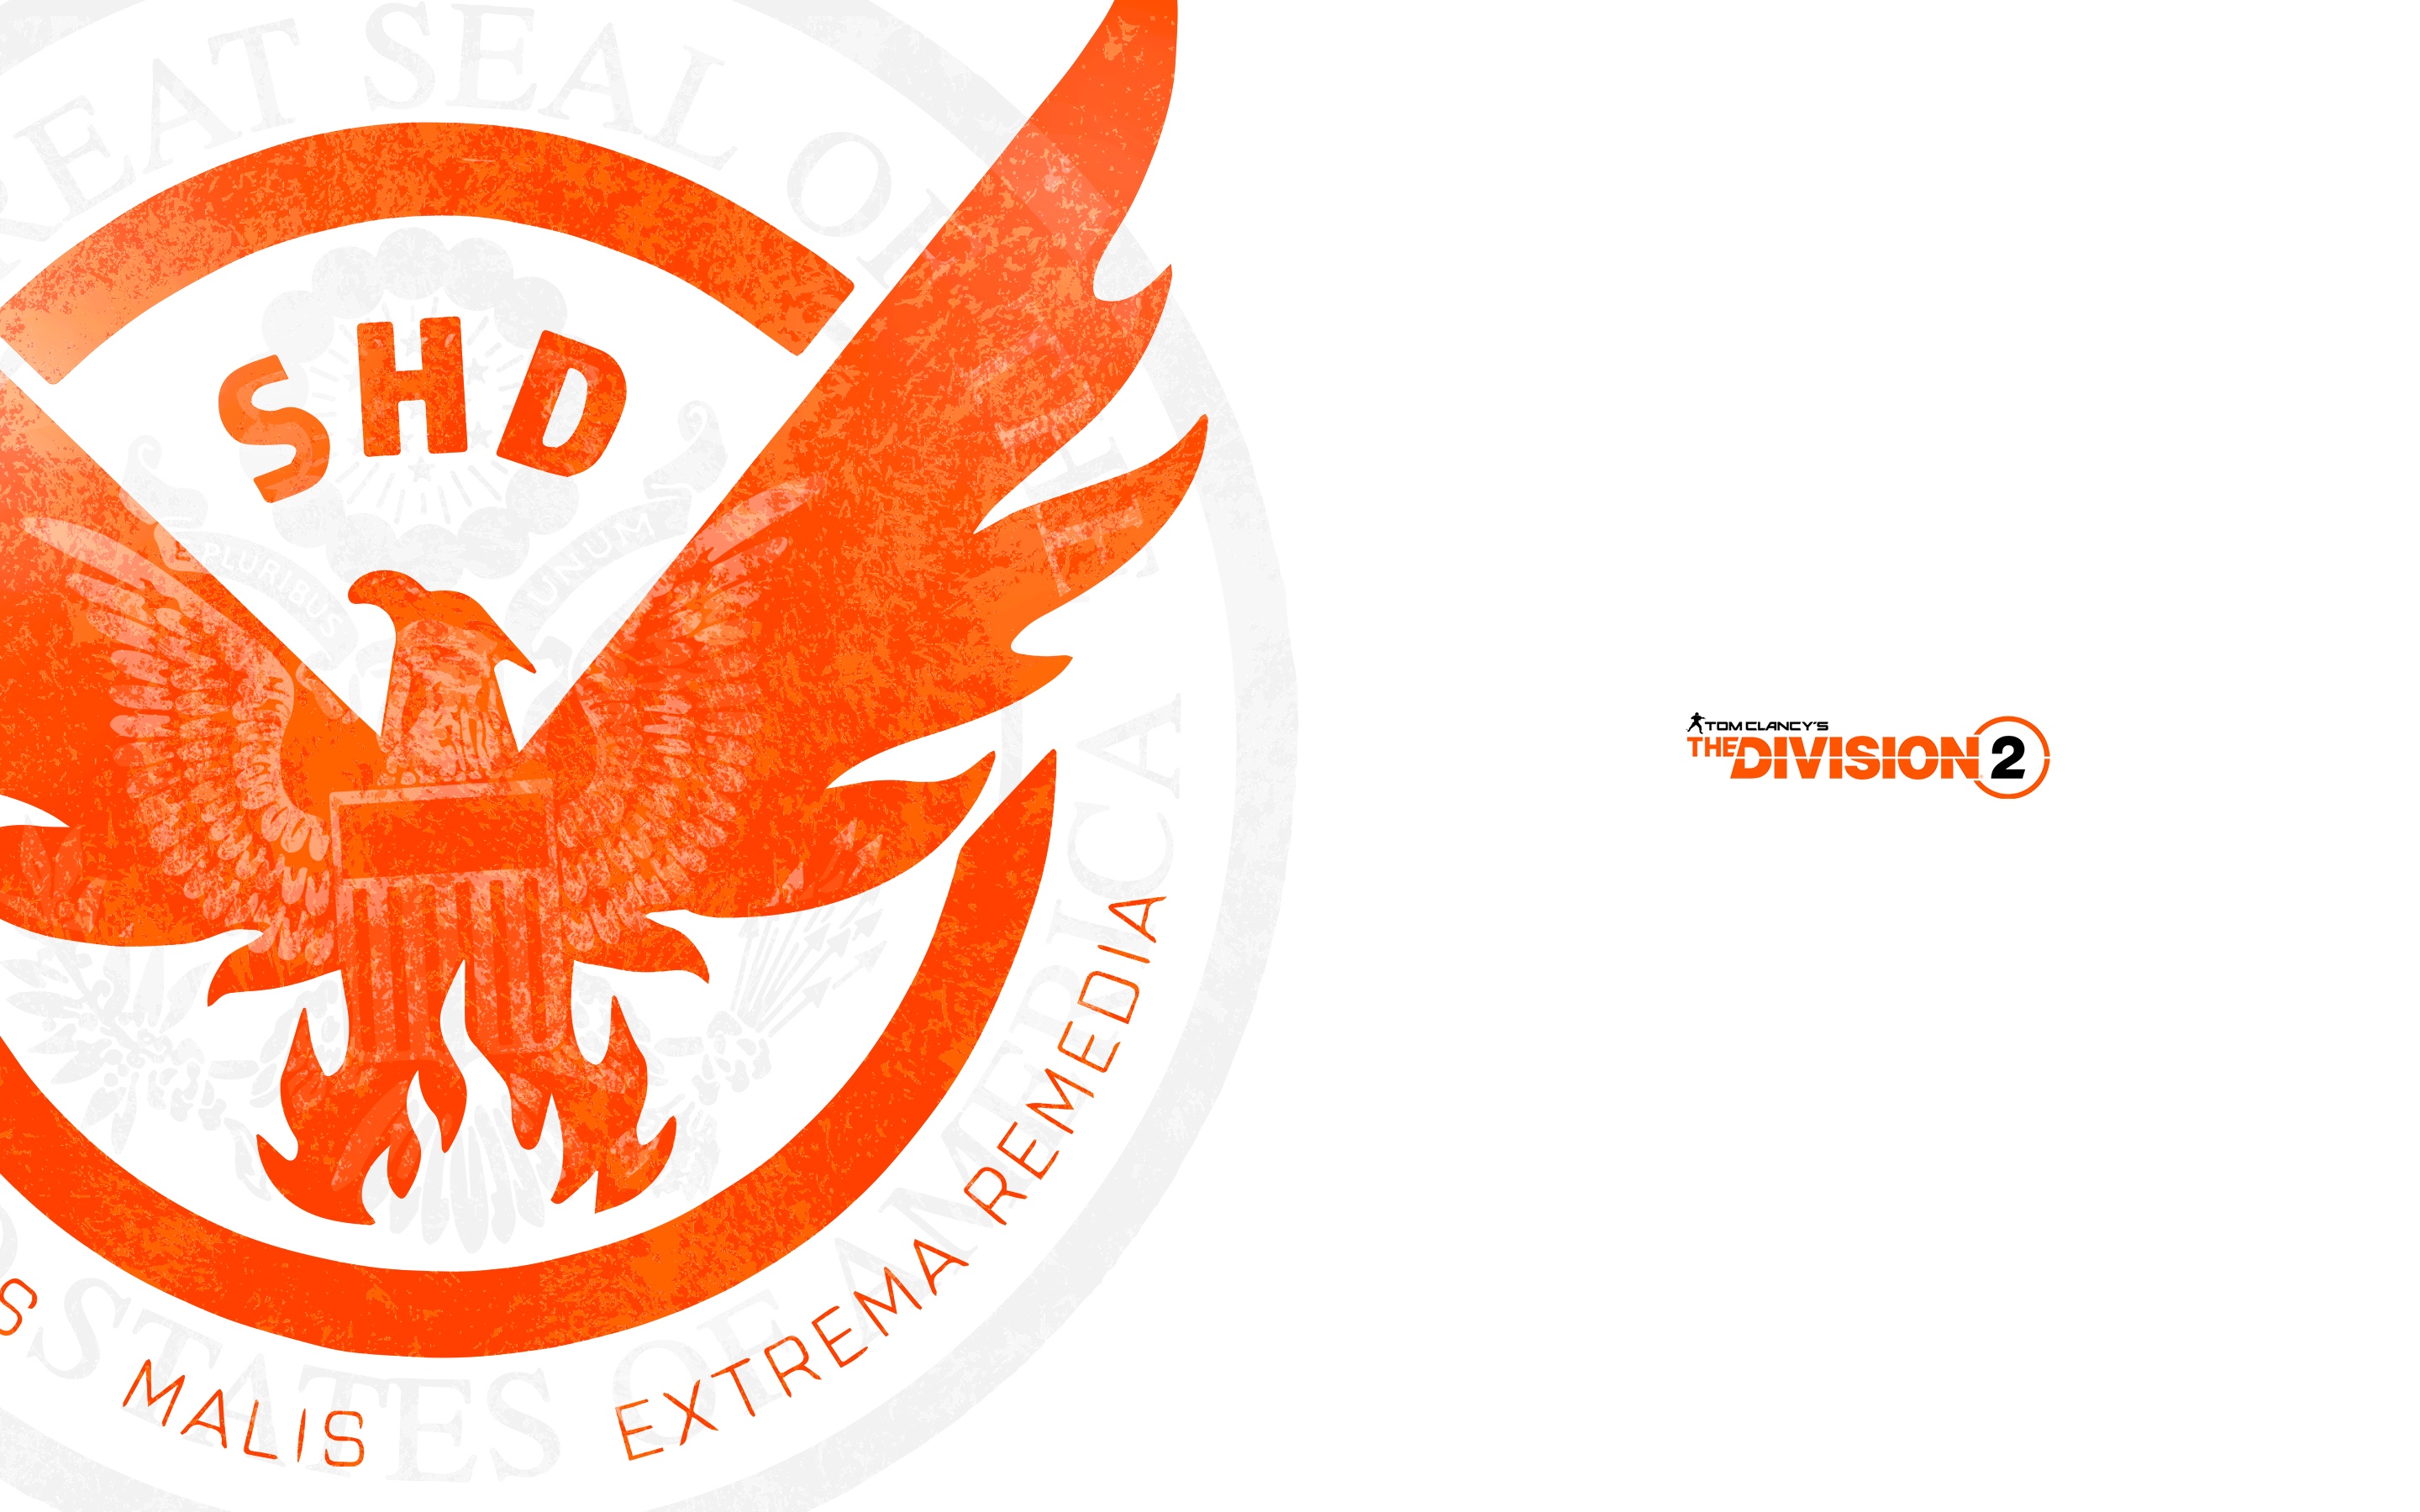 Tom Clancy's The Division 2 Episodes 2019 Wallpaper